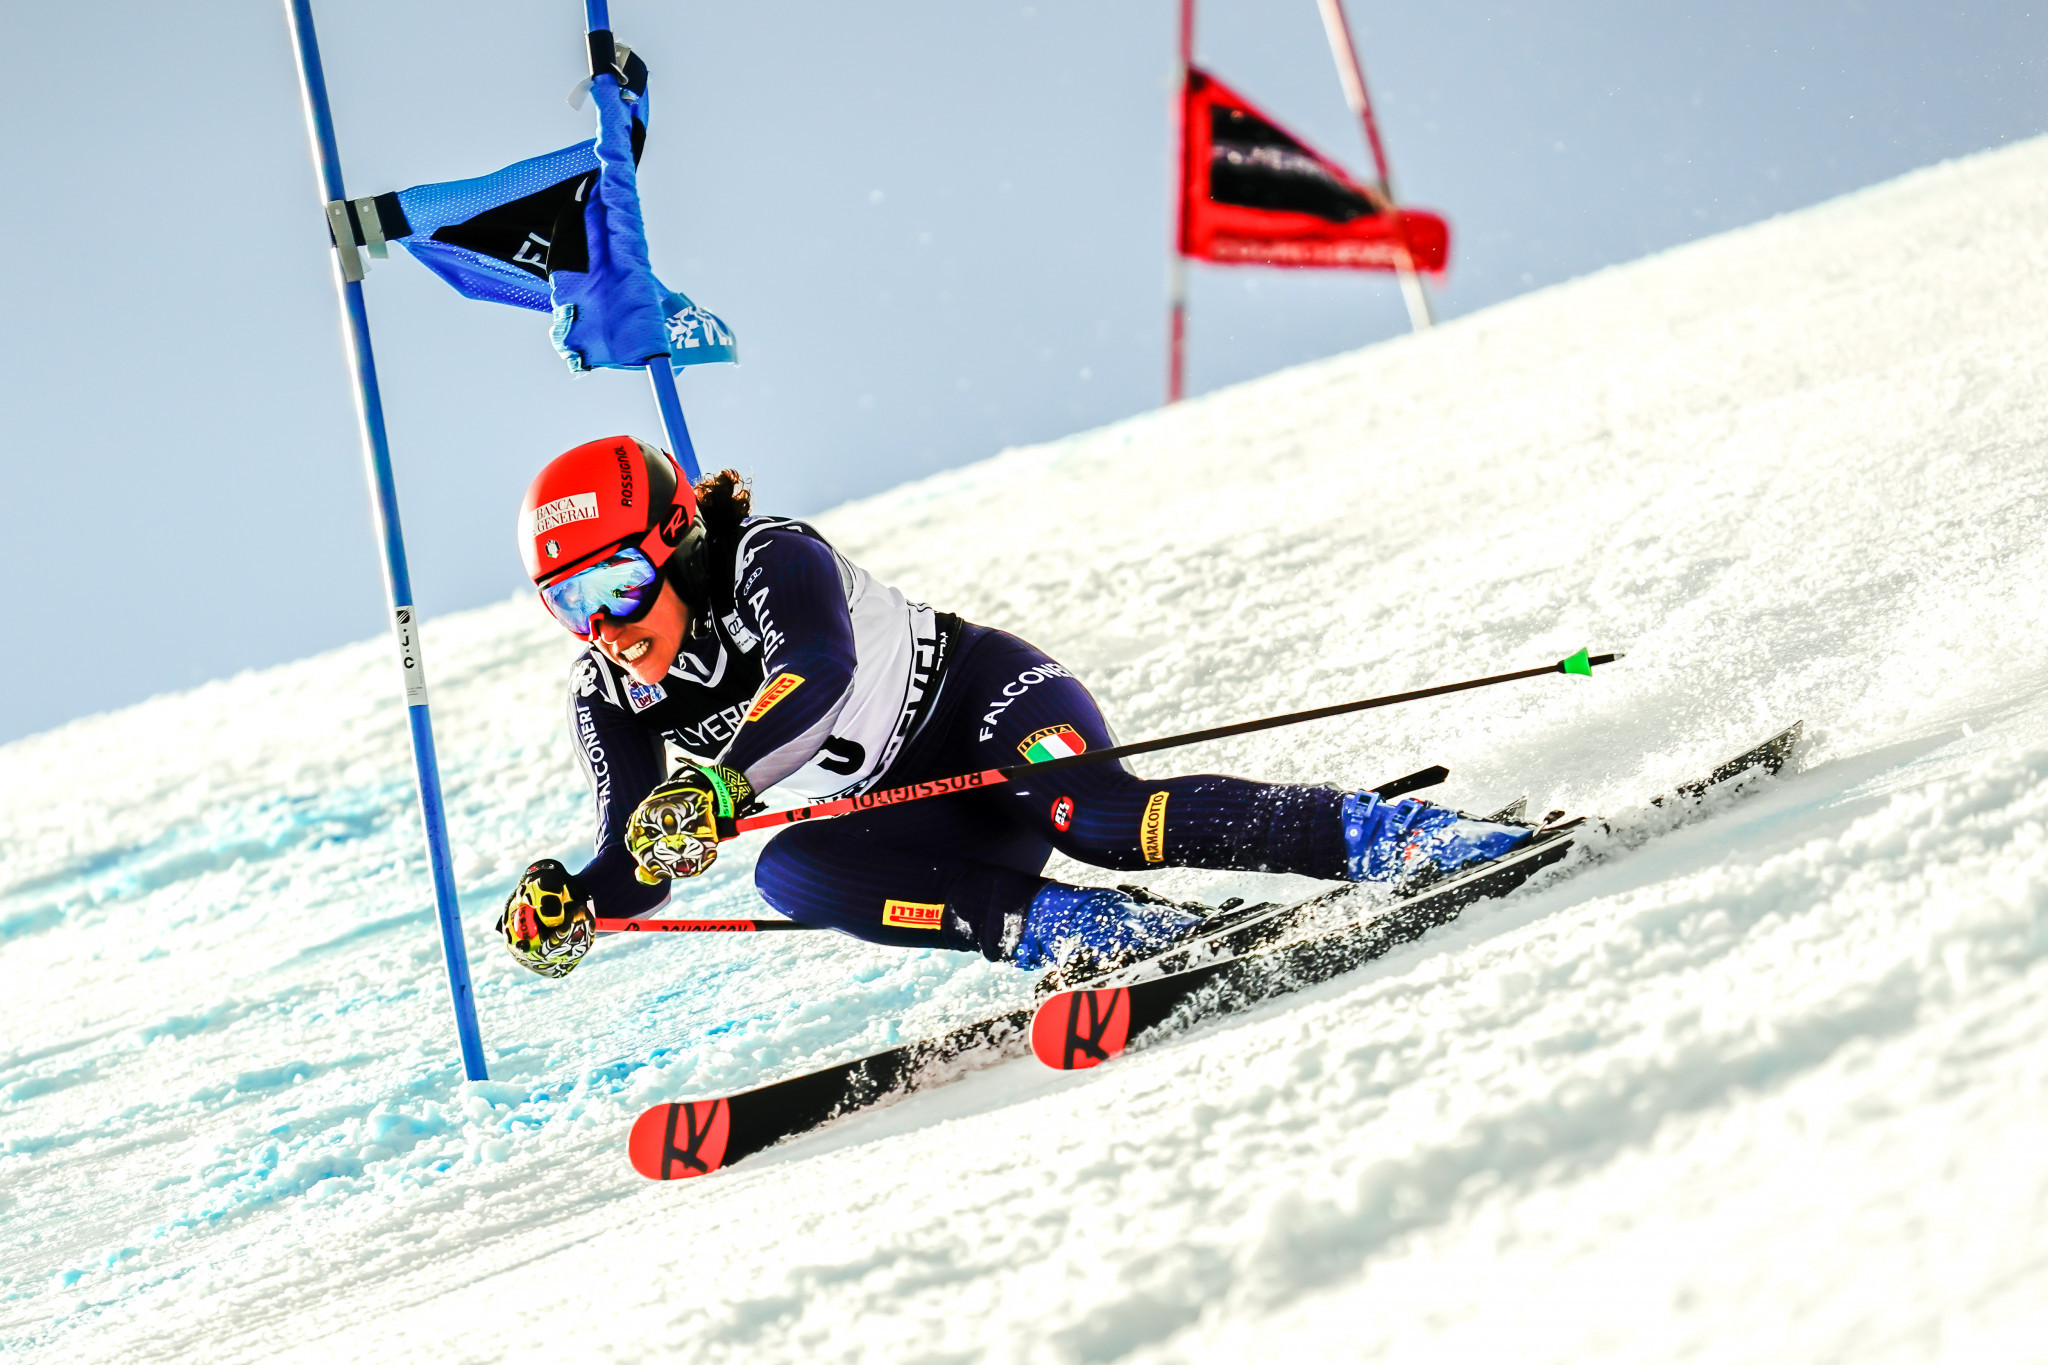 Brignone wins giant slalom at FIS Alpine Skiing World Cup in Courchevel